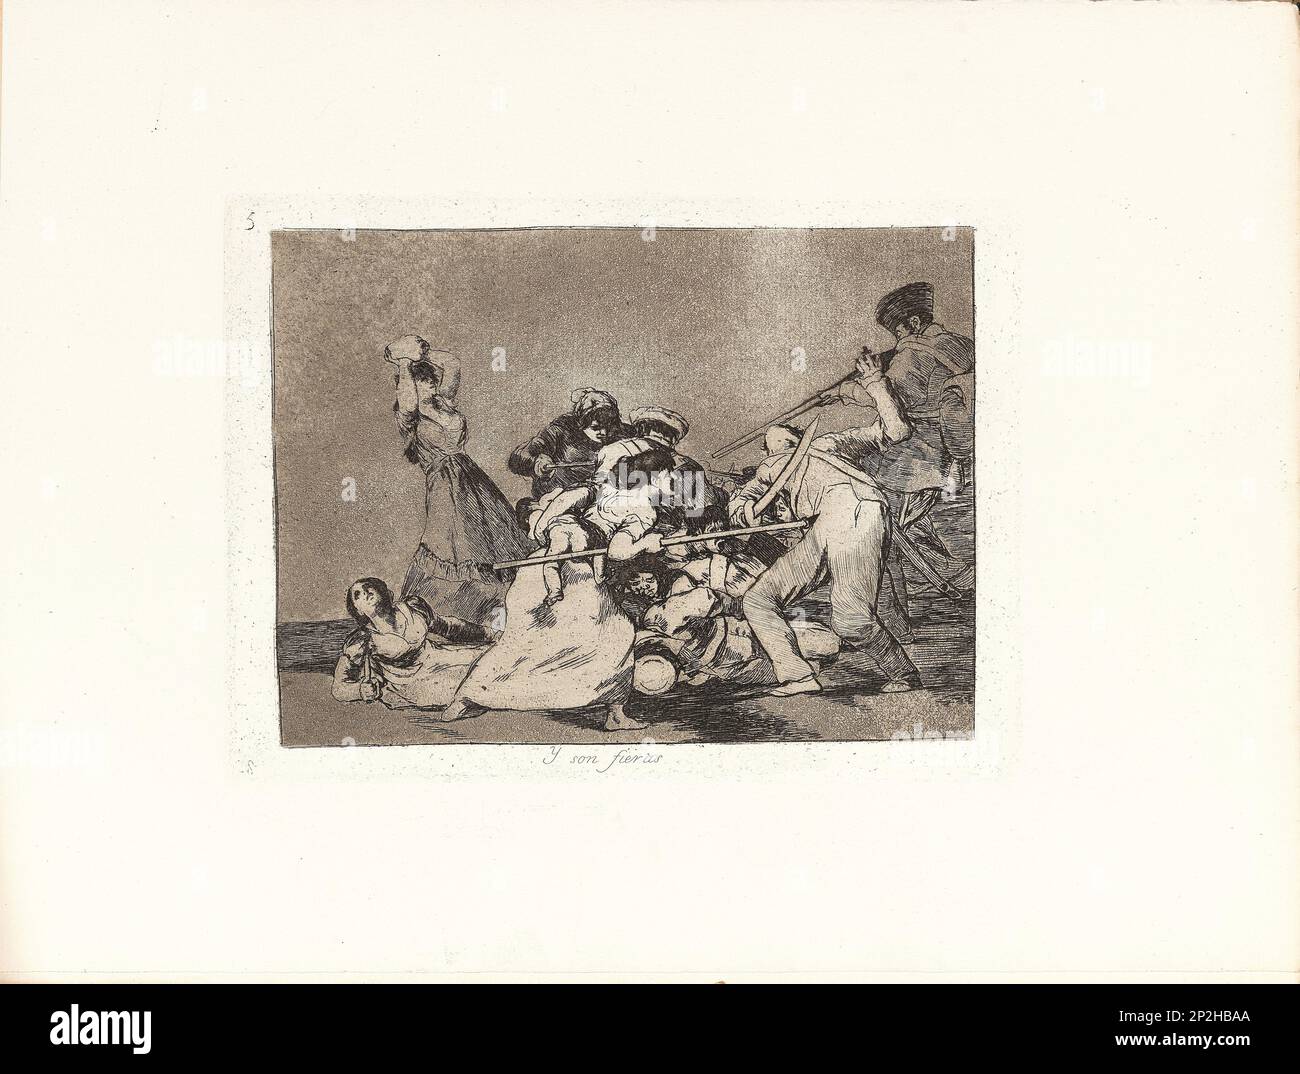 Los Desastres de la Guerra (The Disasters of War), Plate 5: Y son fier&#xe0;s (And are like wild beasts), 1810s. Private Collection. Stock Photo